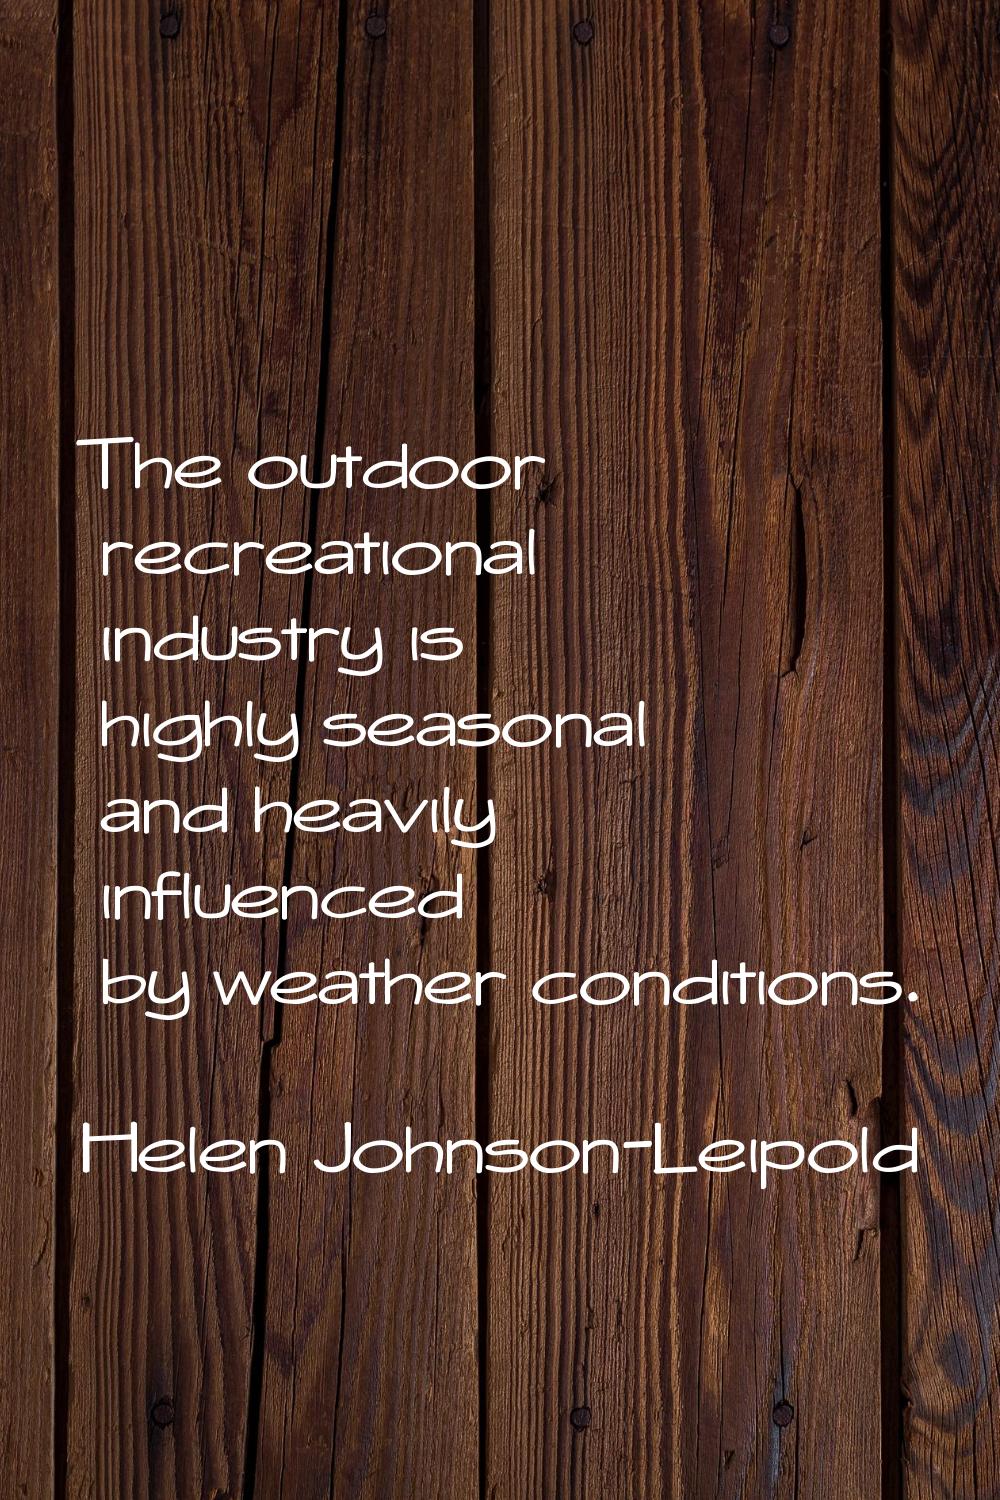 The outdoor recreational industry is highly seasonal and heavily influenced by weather conditions.